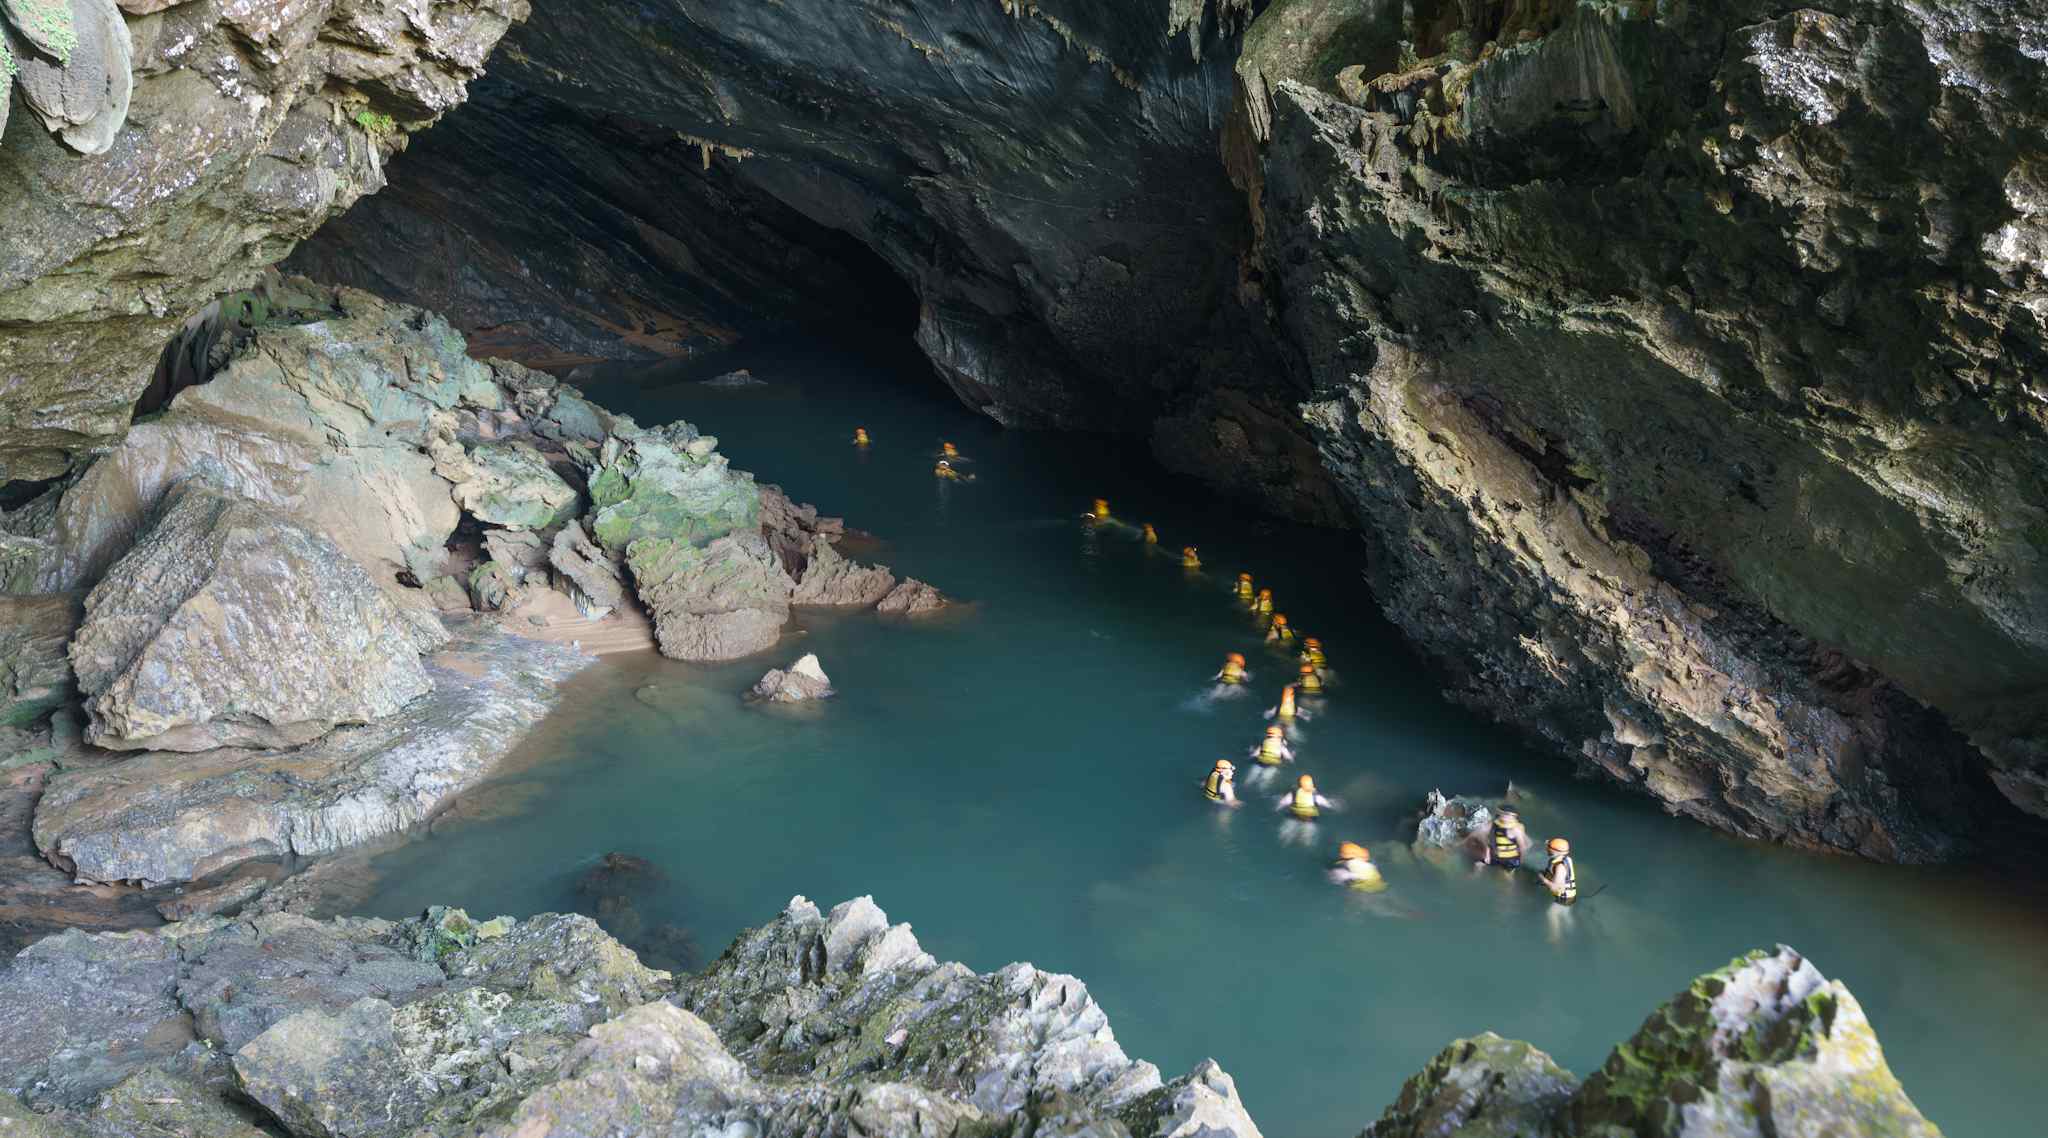 Swimming through Tra Ang Cave, Vietnam. Photo: Easia Active.